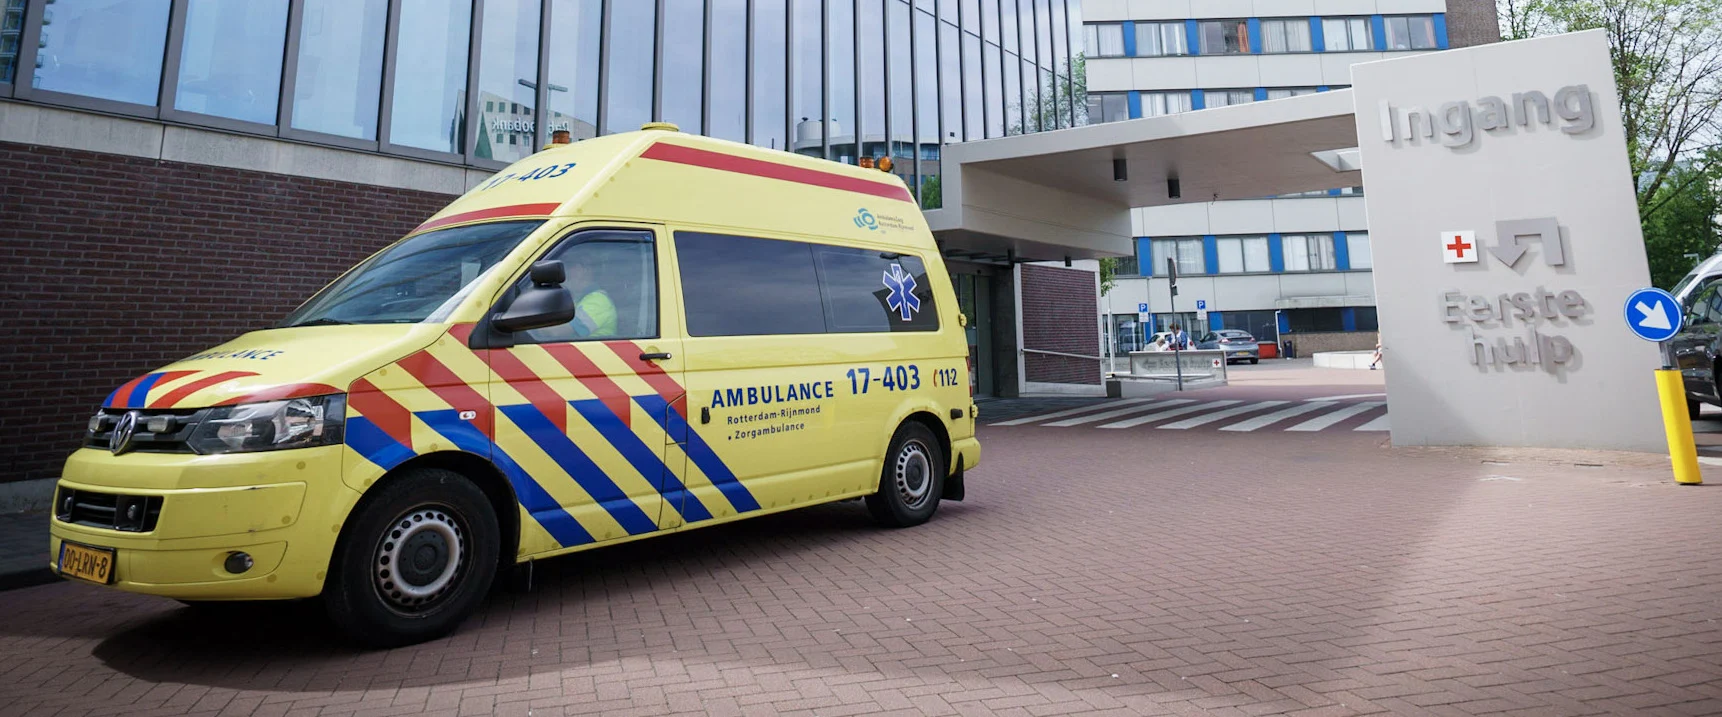 ambulance in front of hospital